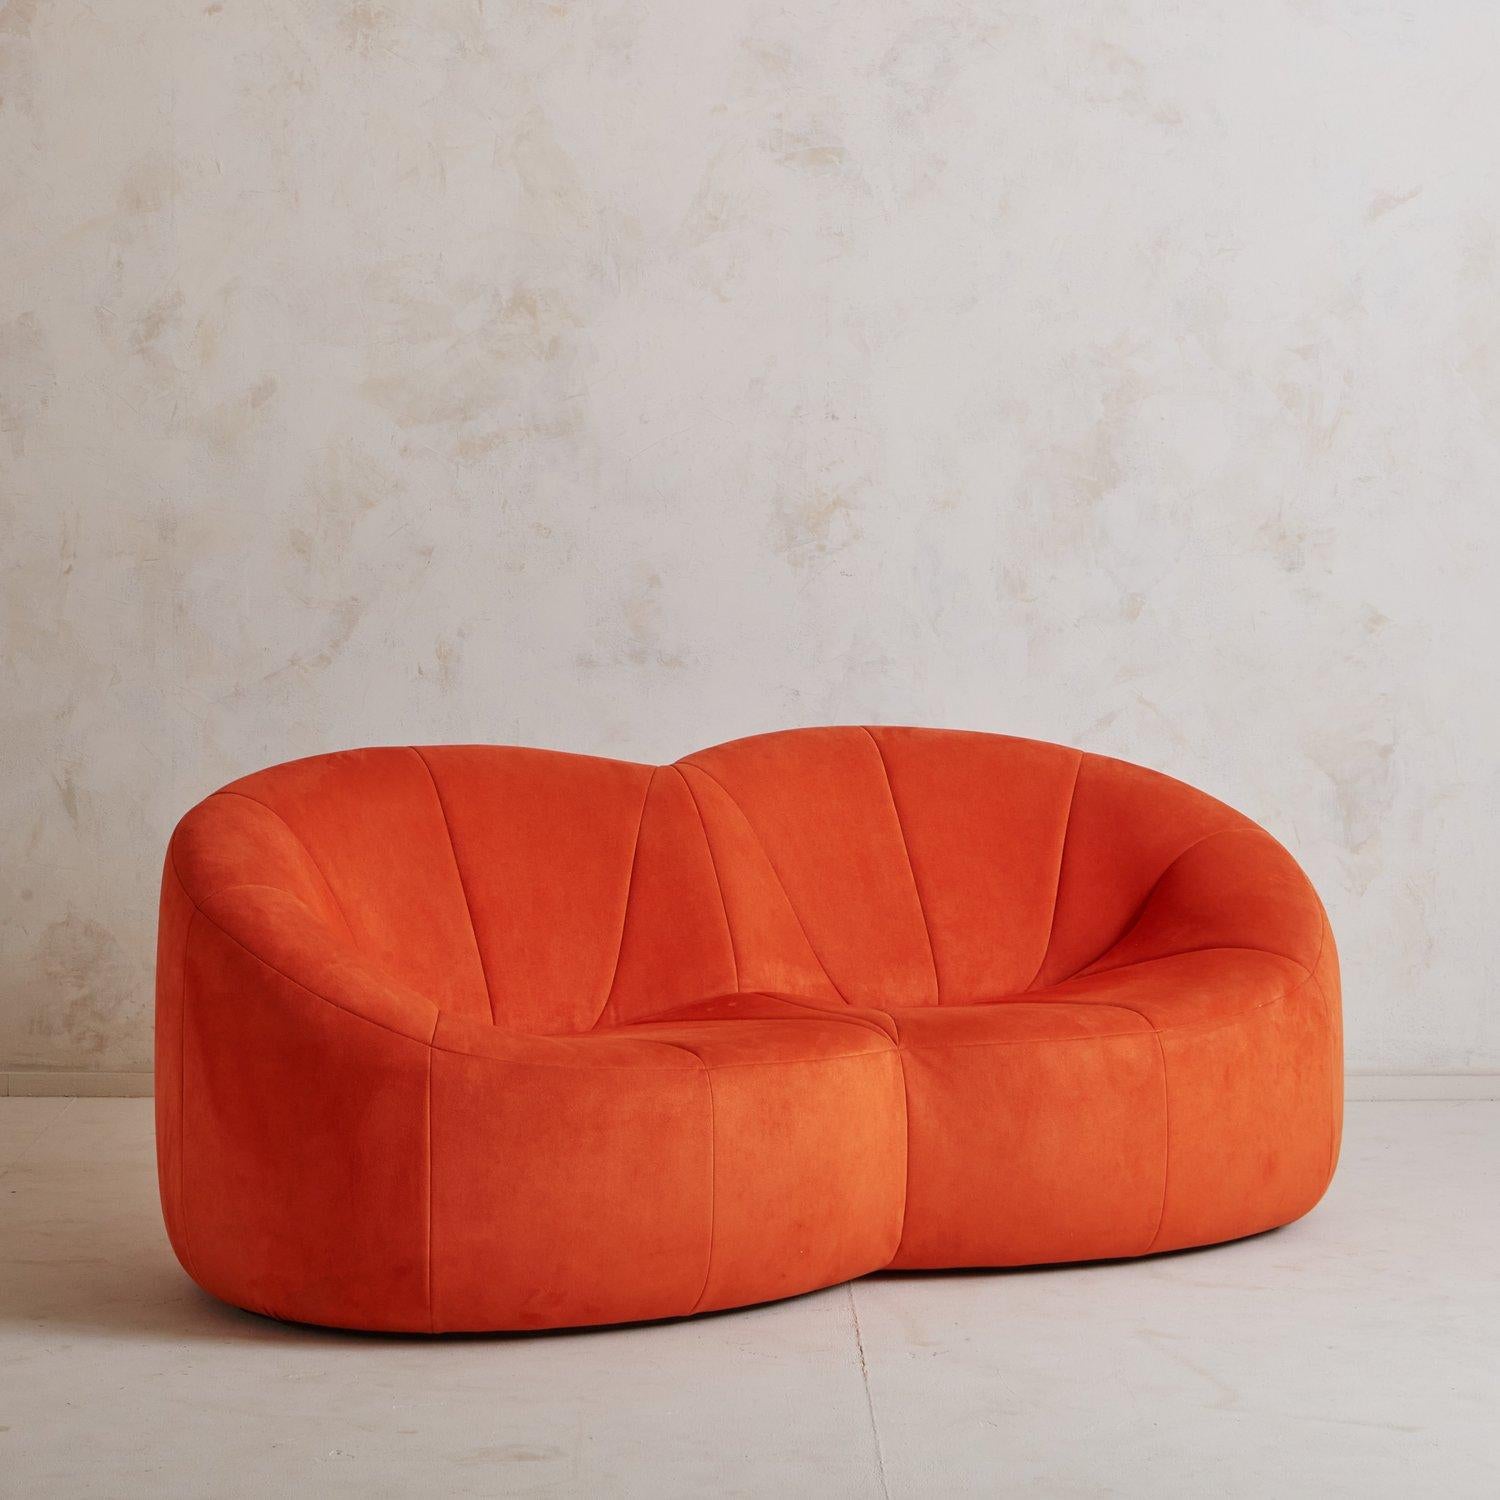 An iconic pumpkin sofa designed by Pierre Paulin in 1971 and produced in France by Alpha. This iconic sofa retains its original orange suede upholstery and ‘Pierre Paulin Designer - Made in France’ tag on the seat back. Sourced in France.

This